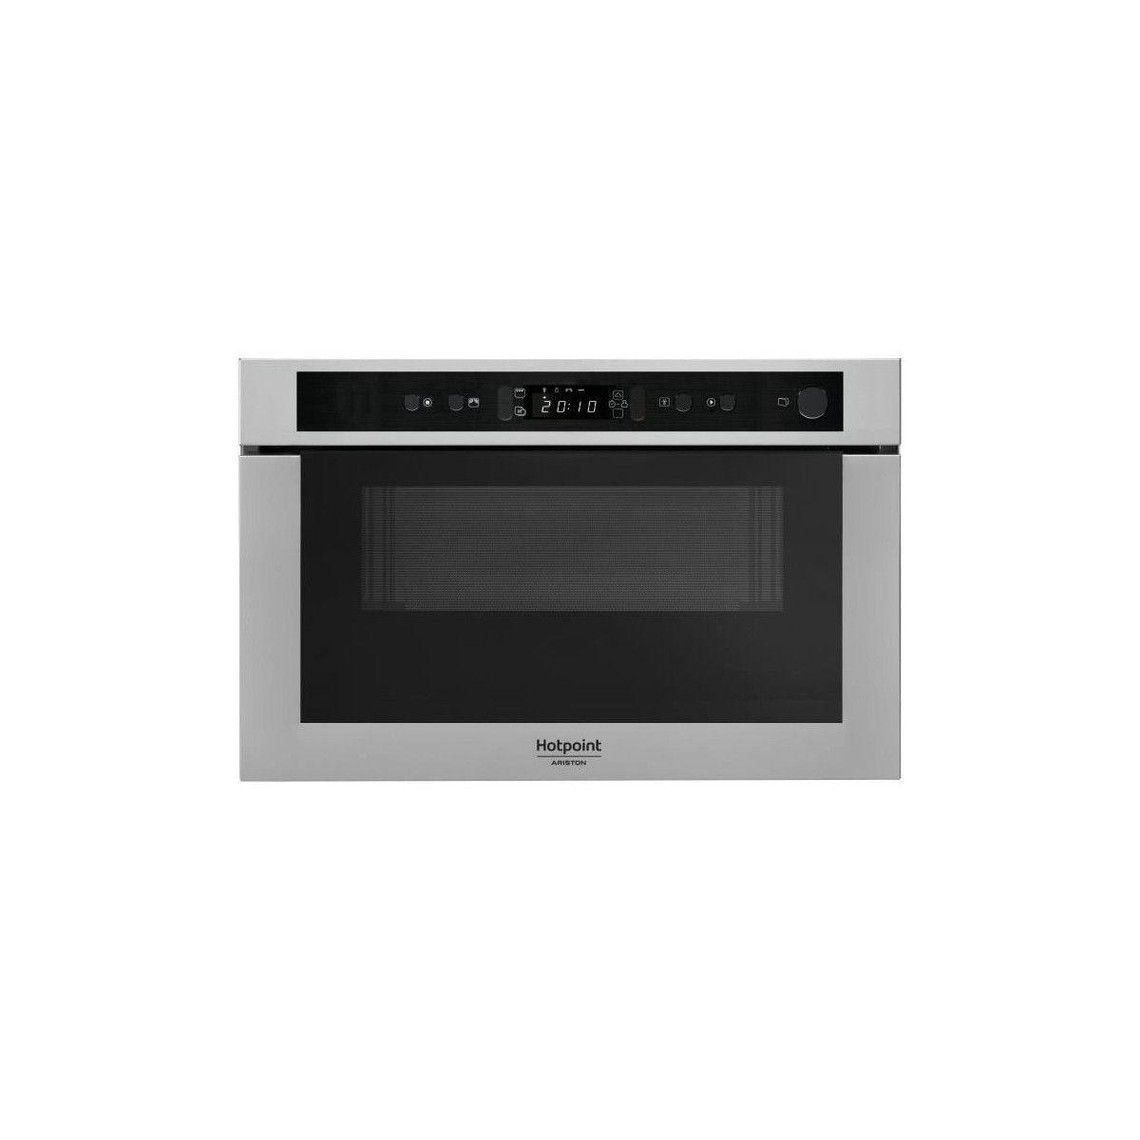 Hotpoint Micro-ondes combiné encastrable inox anti-traceMH 400 IX - 22L - 750 W